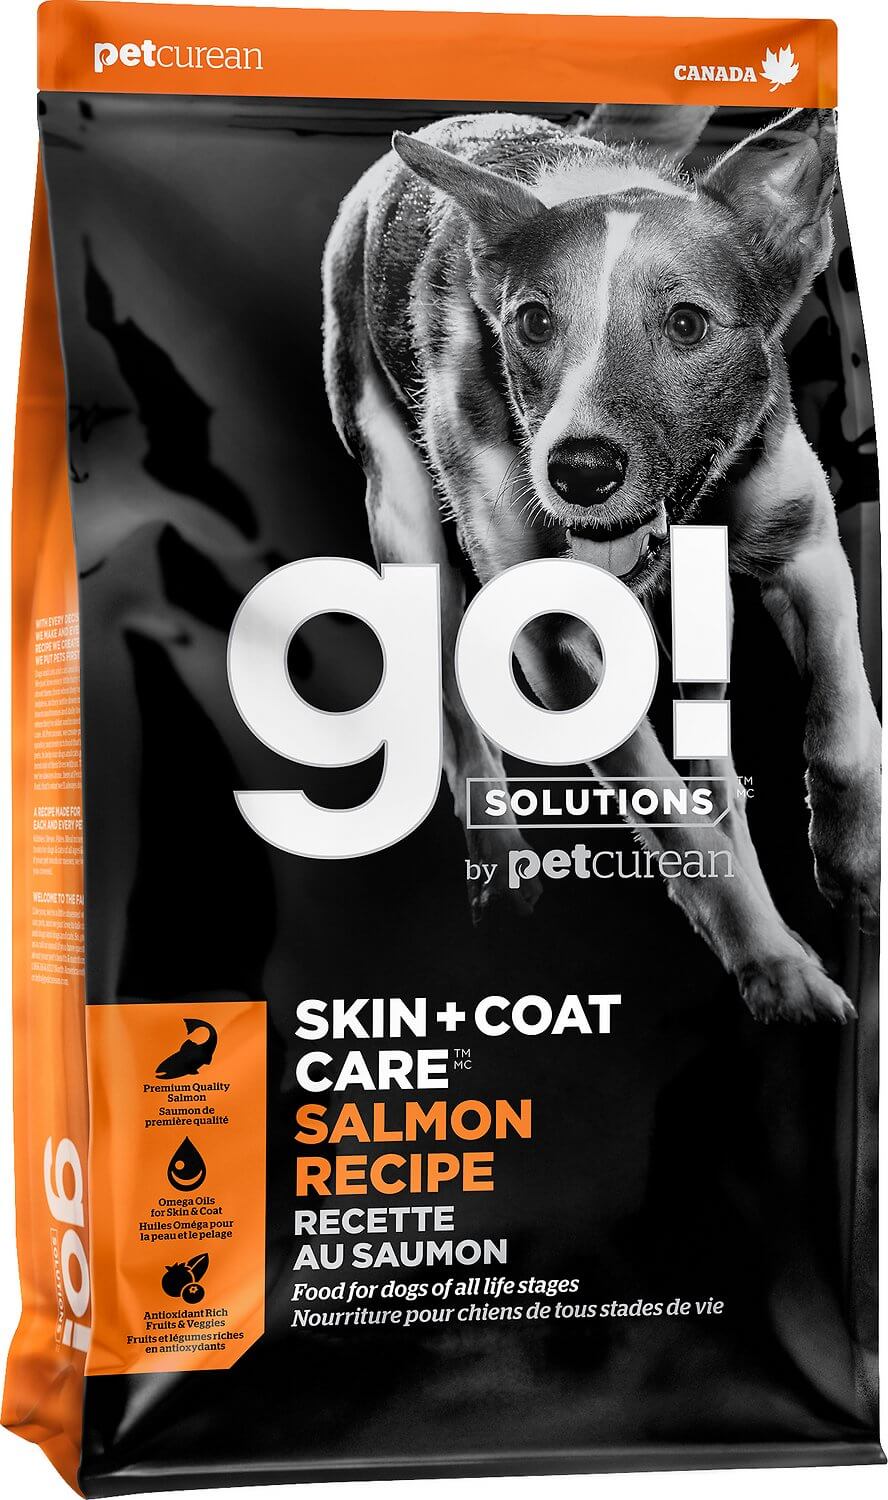 Go! Skin + Coat Care Dog Food Review (Dry)